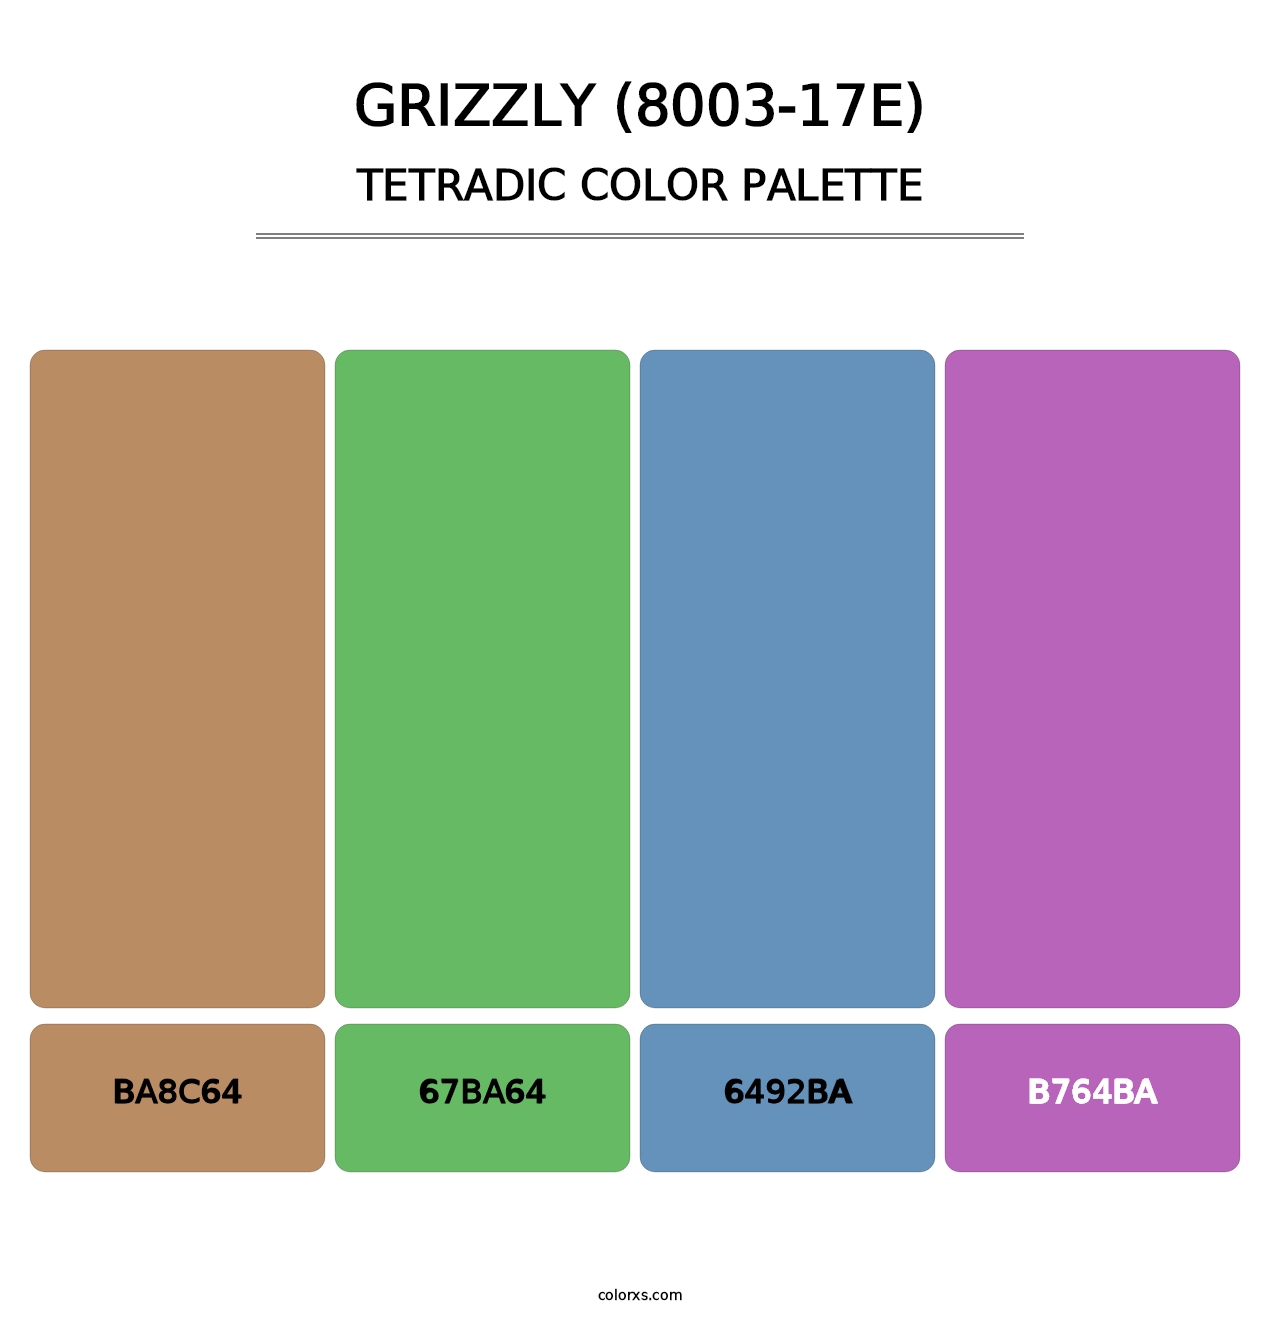 Grizzly (8003-17E) - Tetradic Color Palette